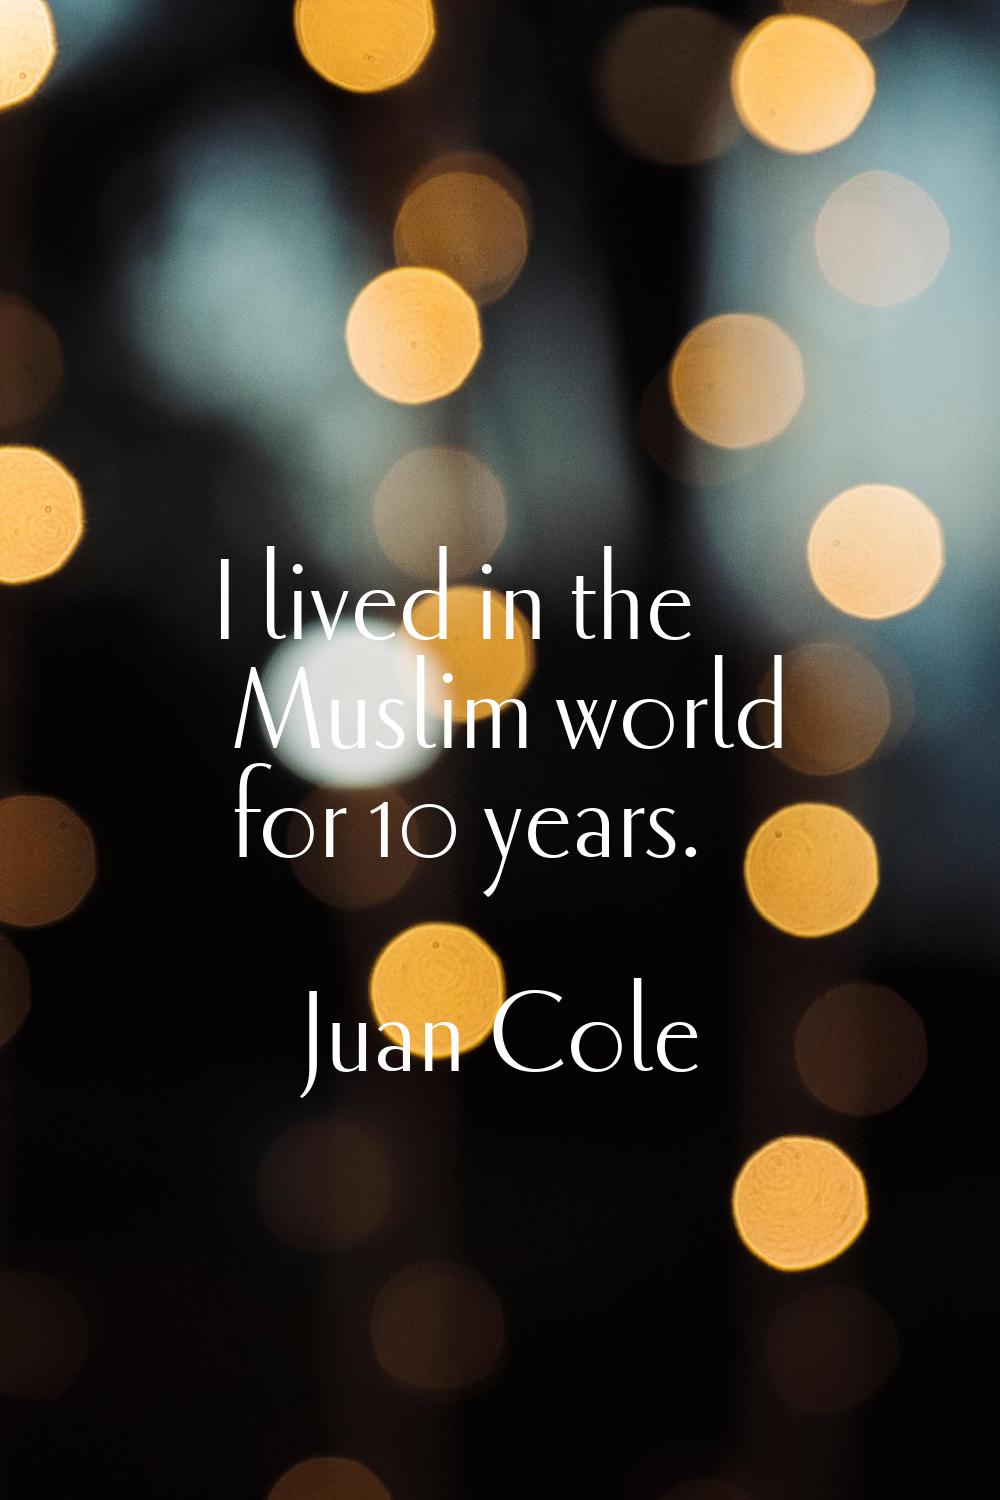 I lived in the Muslim world for 10 years.